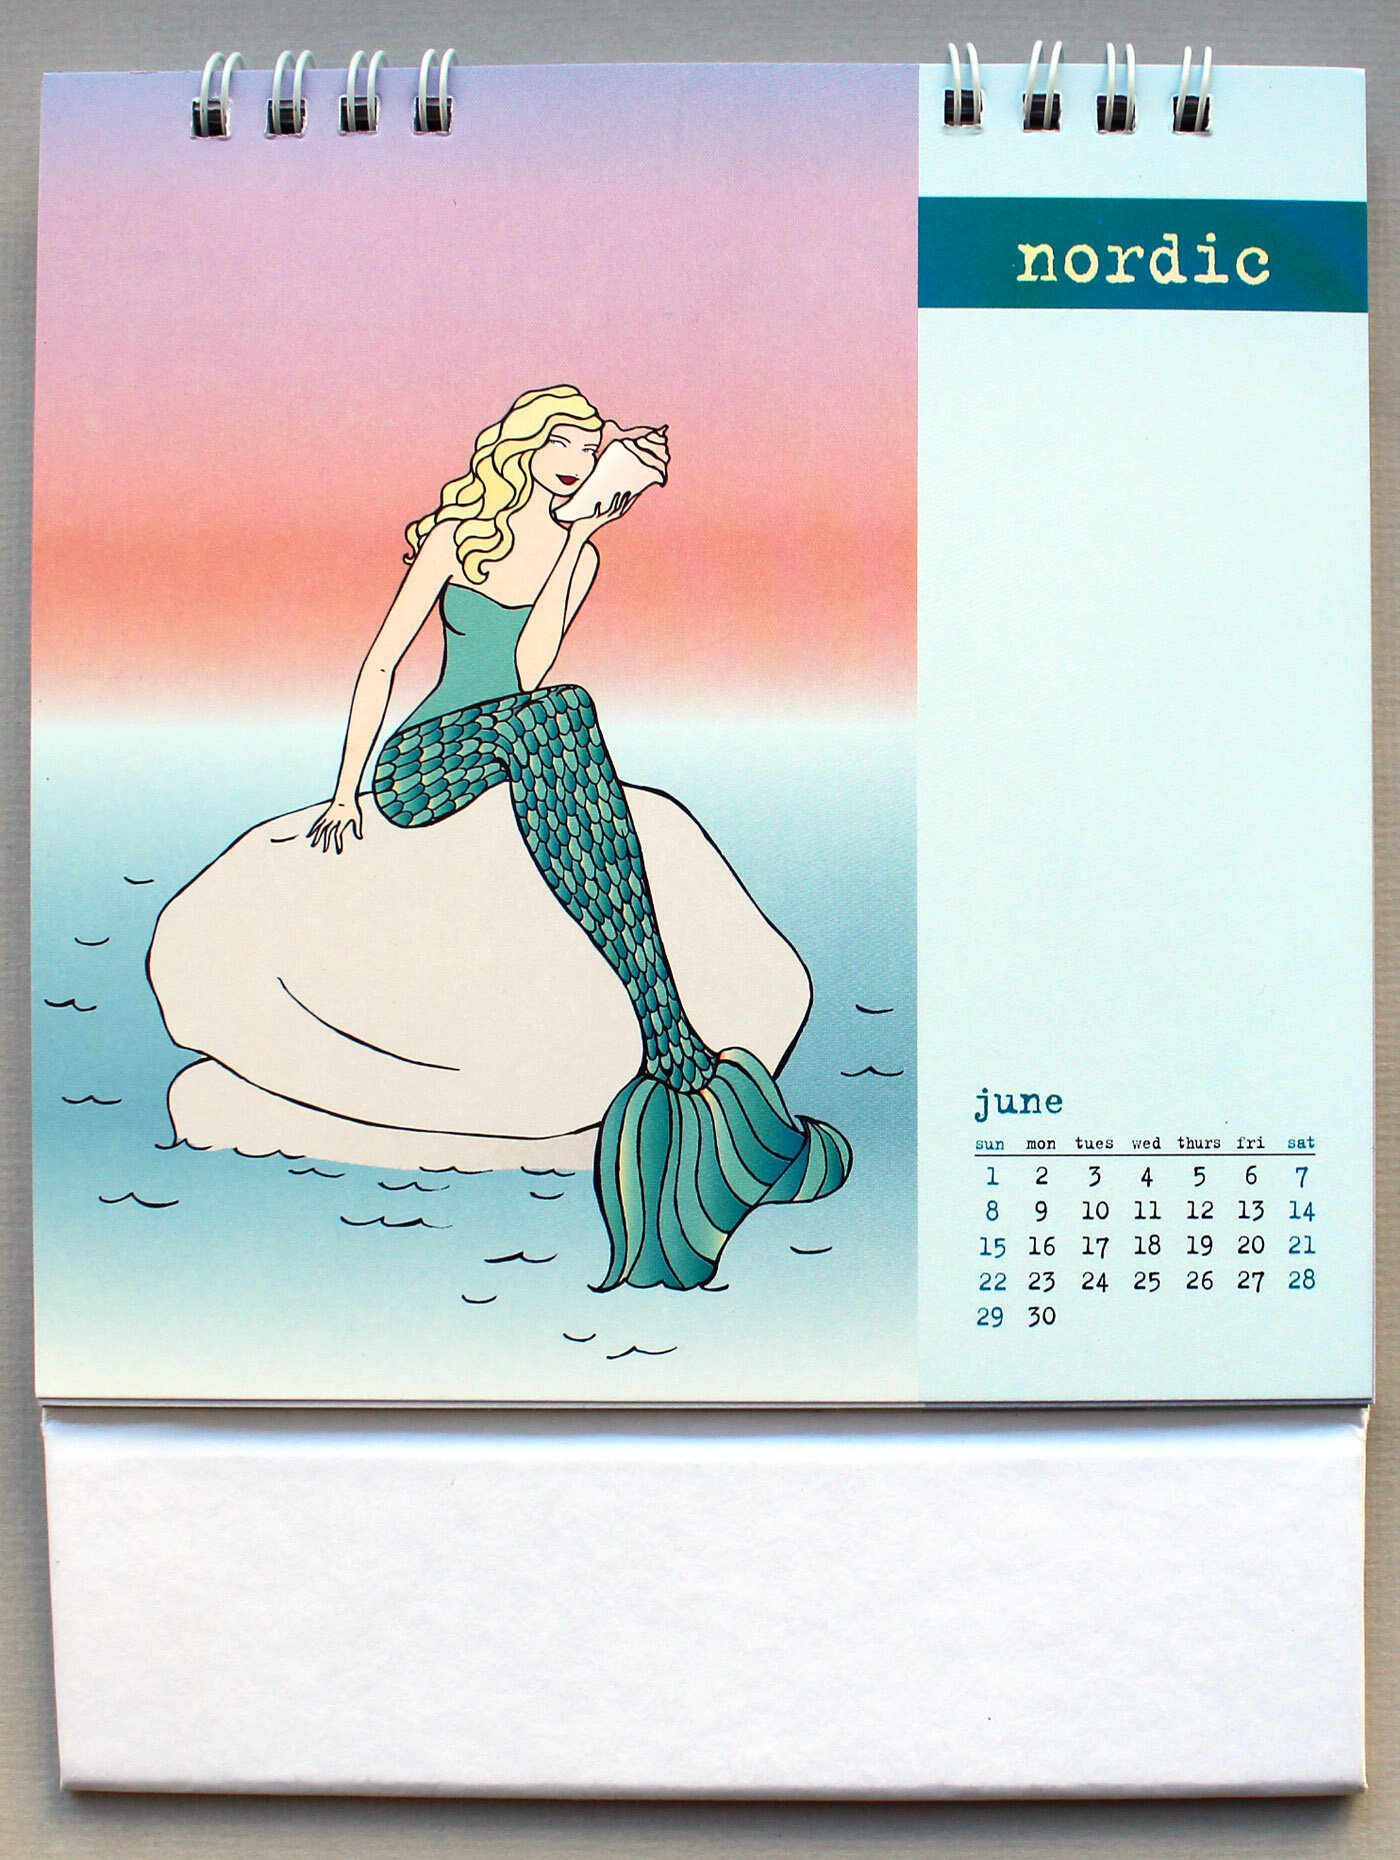   Calendar Stila 2003   Stila provided their employees with an illustrated calendar that featured one of their signature girls visiting a different city each month. For the month of June, Stila transformed one of the girls into a mermaid. It is belie